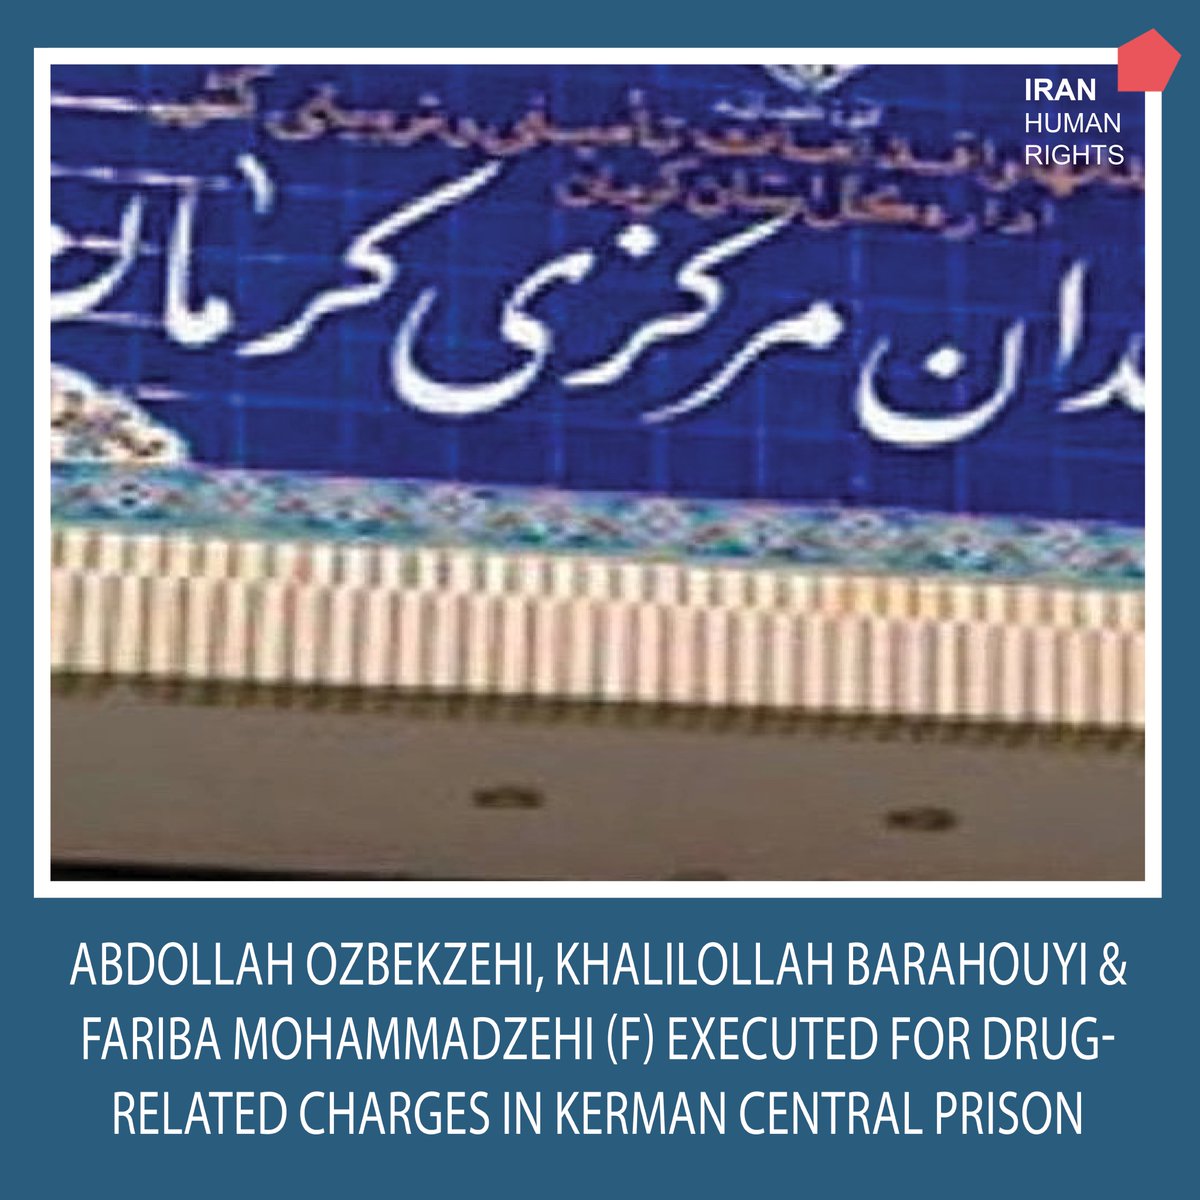 #Iran: 5th WOMAN EXECUTED FOR DRUG OFFENCES IN 2024

Abdollah Ozbekzehi, Khalilollah Barahouyi and Fariba Mohammadzehi were executed for drug-related charges in Kerman Central Prison yesterday. Reportedly, there were all Baluch minorities.

#StopDrugExecutions
#NoDeathPenalty…